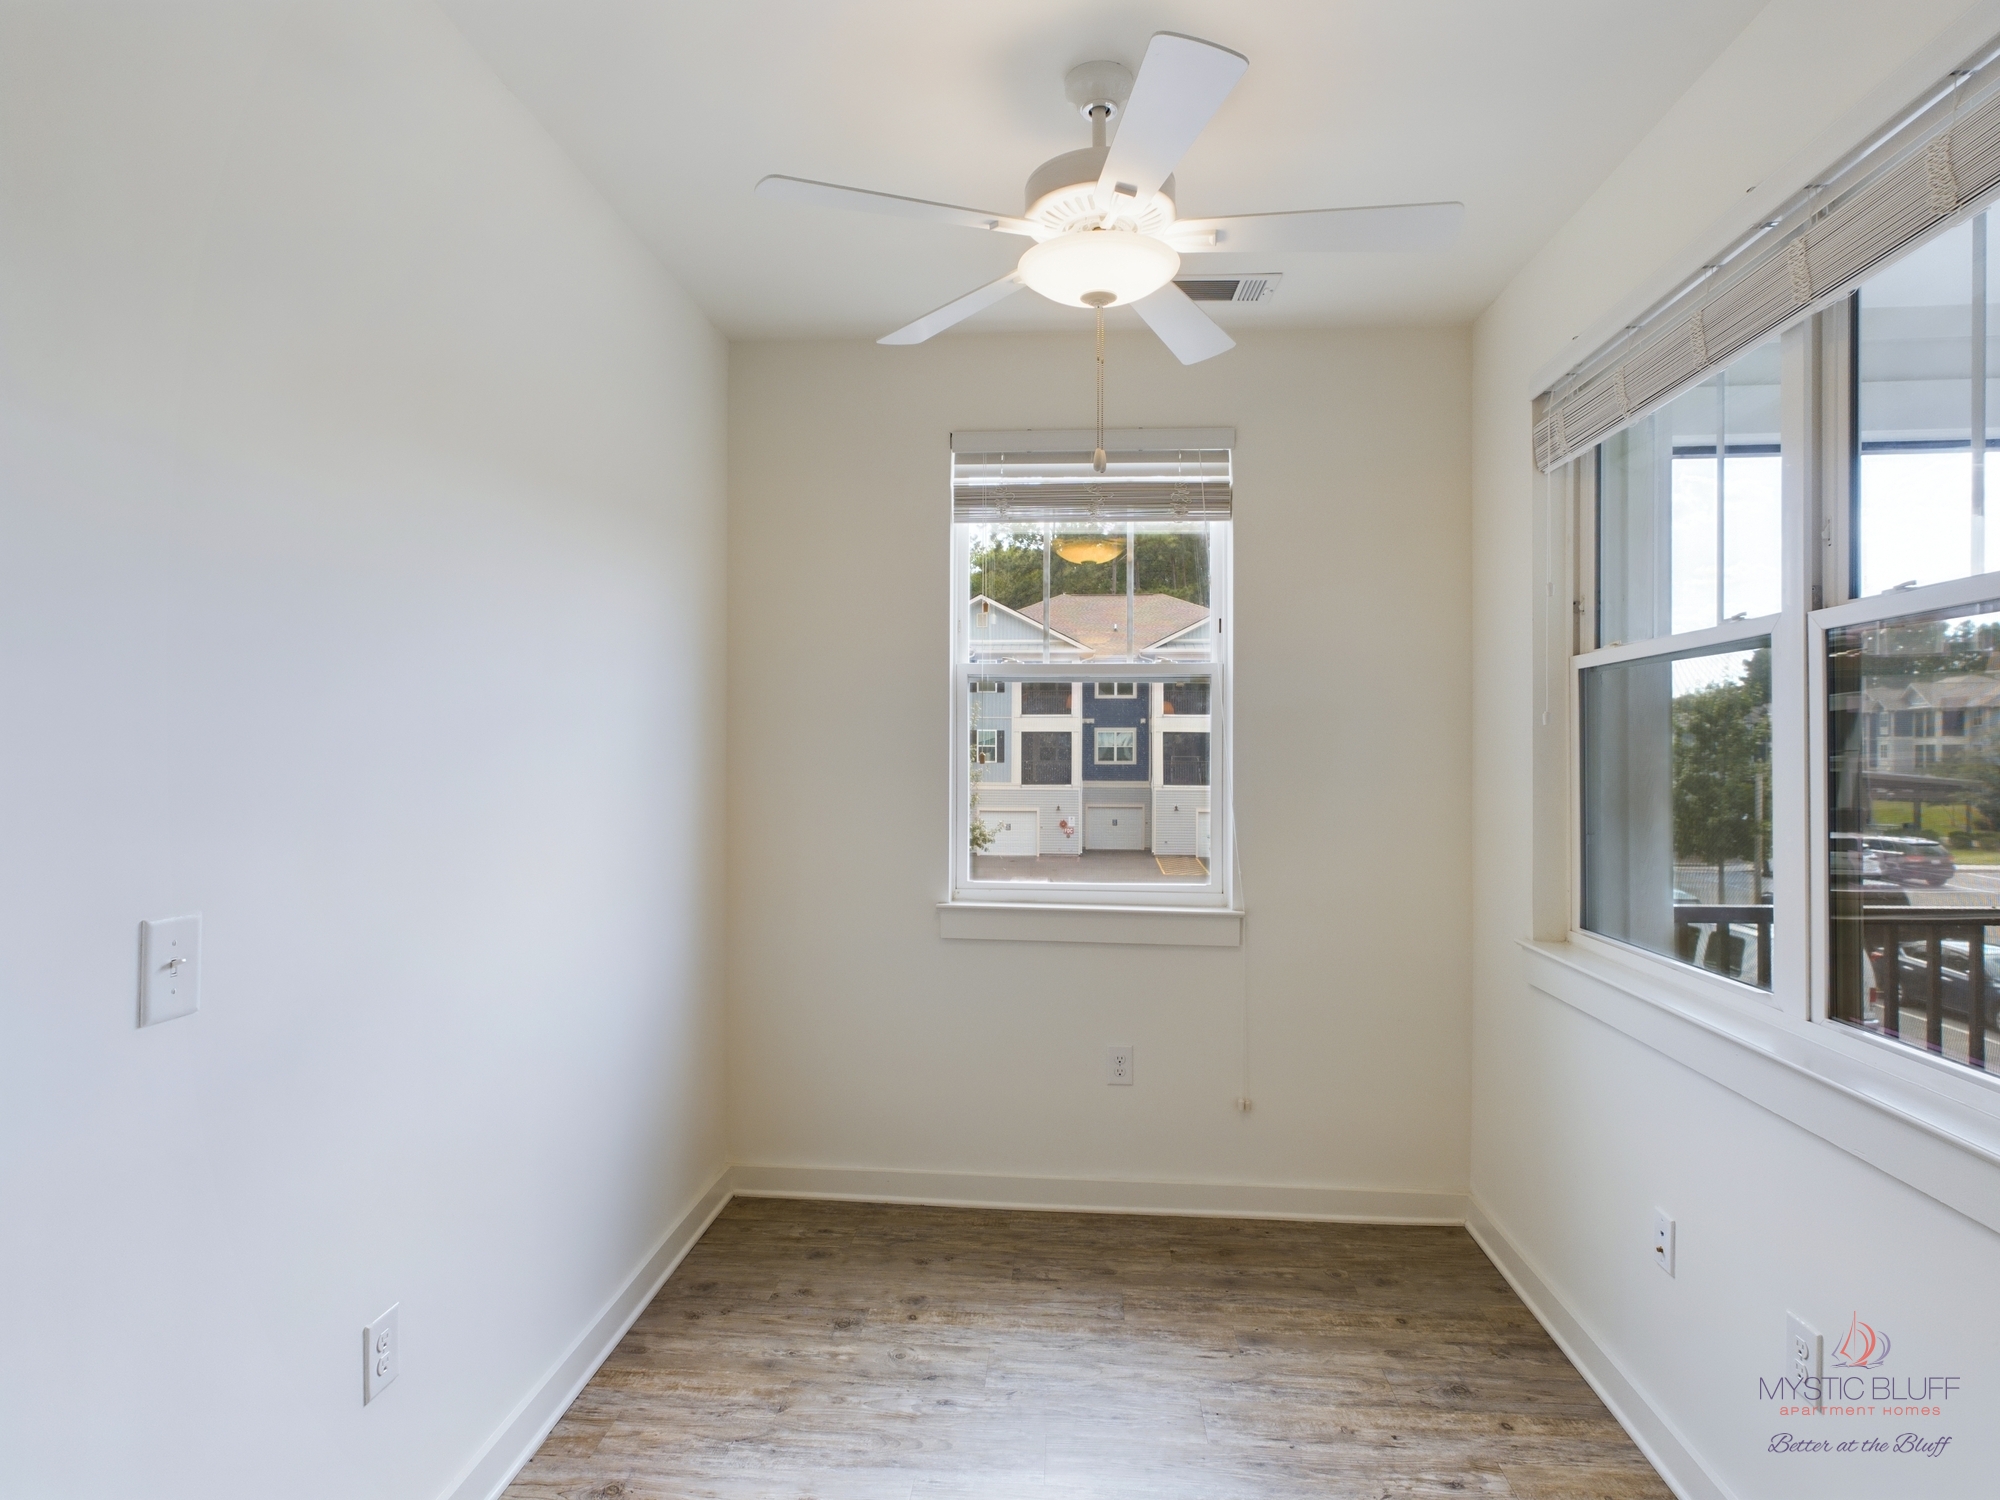 A spacious one-bedroom apartment with hardwood floors and a ceiling fan.